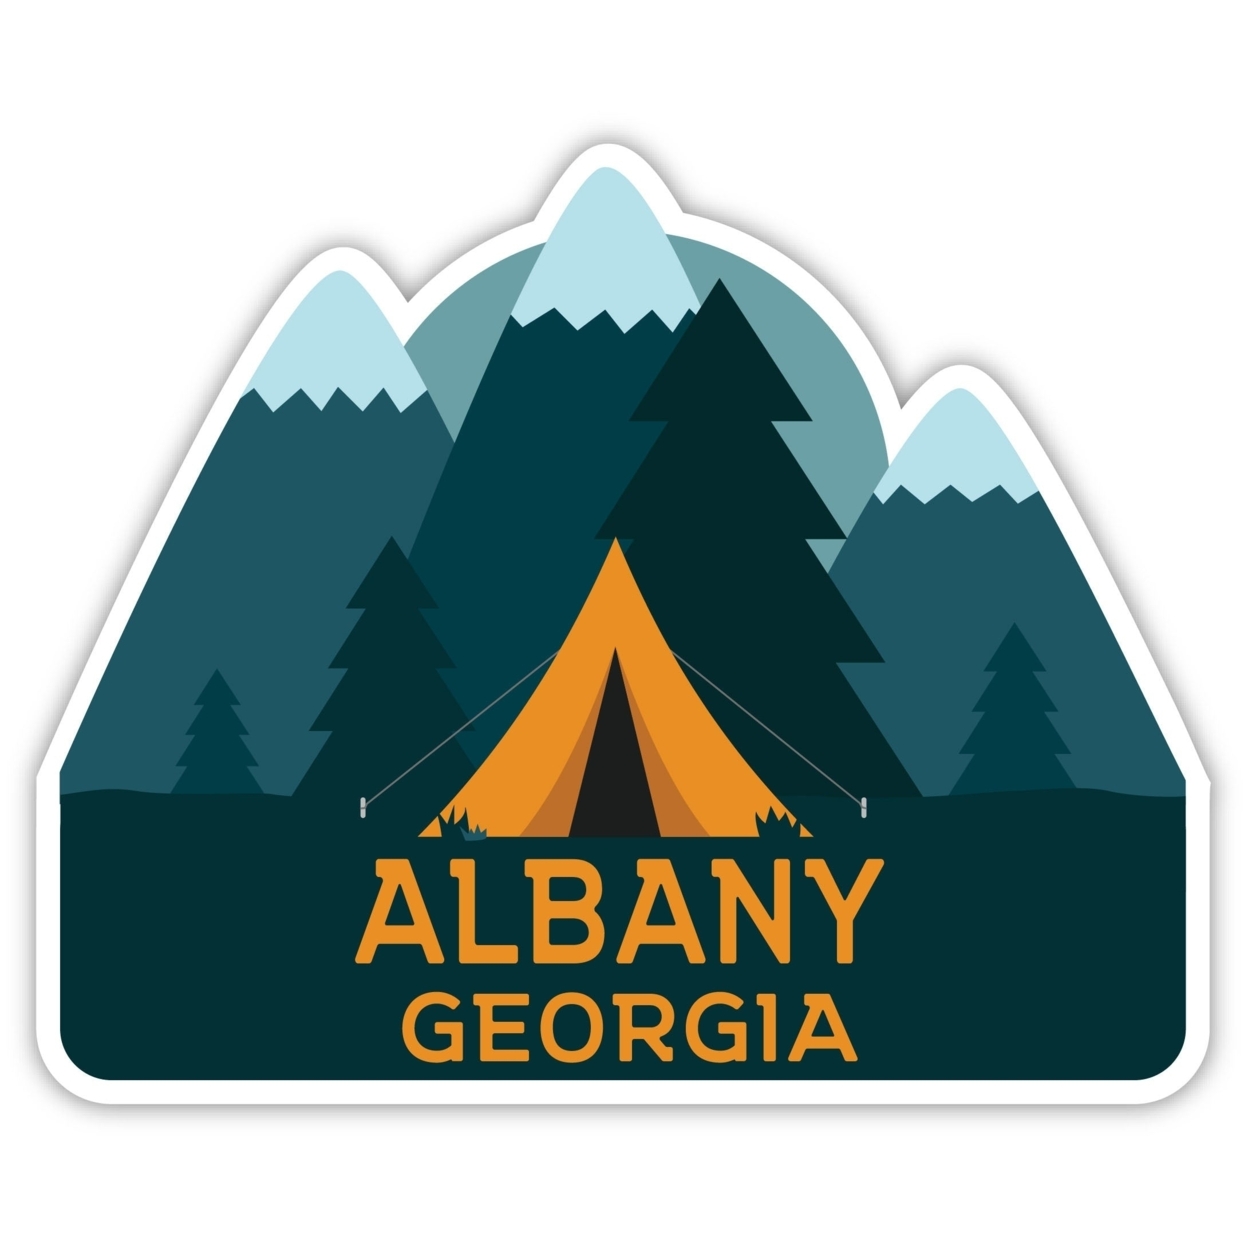 Albany Georgia Souvenir Decorative Stickers (Choose Theme And Size) - 4-Pack, 10-Inch, Tent